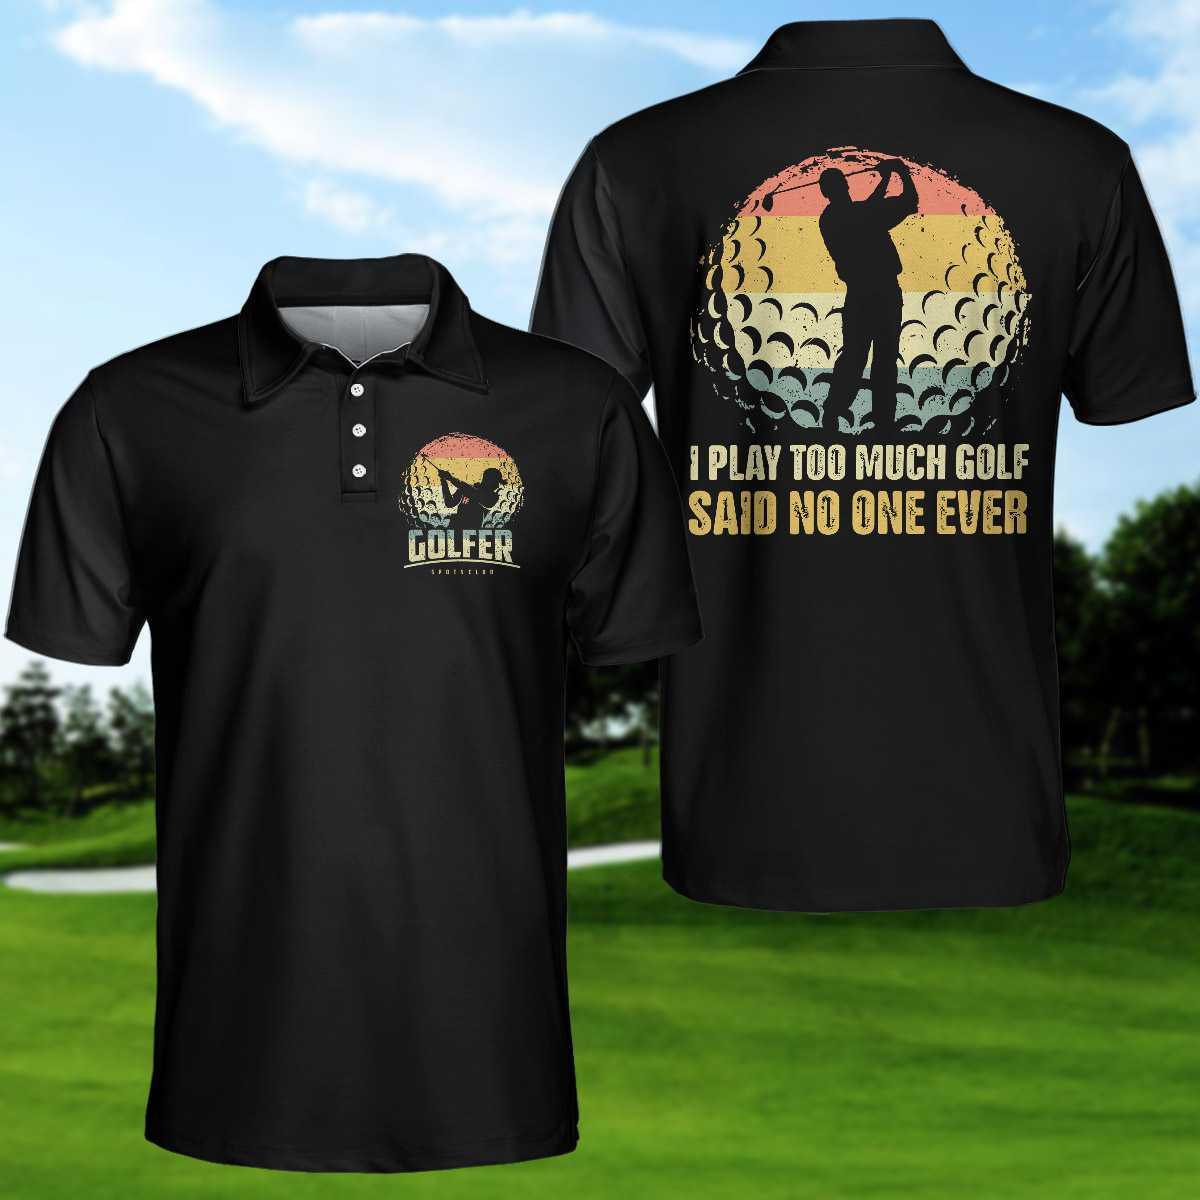 Golf Men Polo Shirts - Vintage Golf Golf Ball I Play Too Much Black Background Men Polo Shirts, Golf Shirt For Men - Perfect Gift For Men, Golfers - Amzanimalsgift